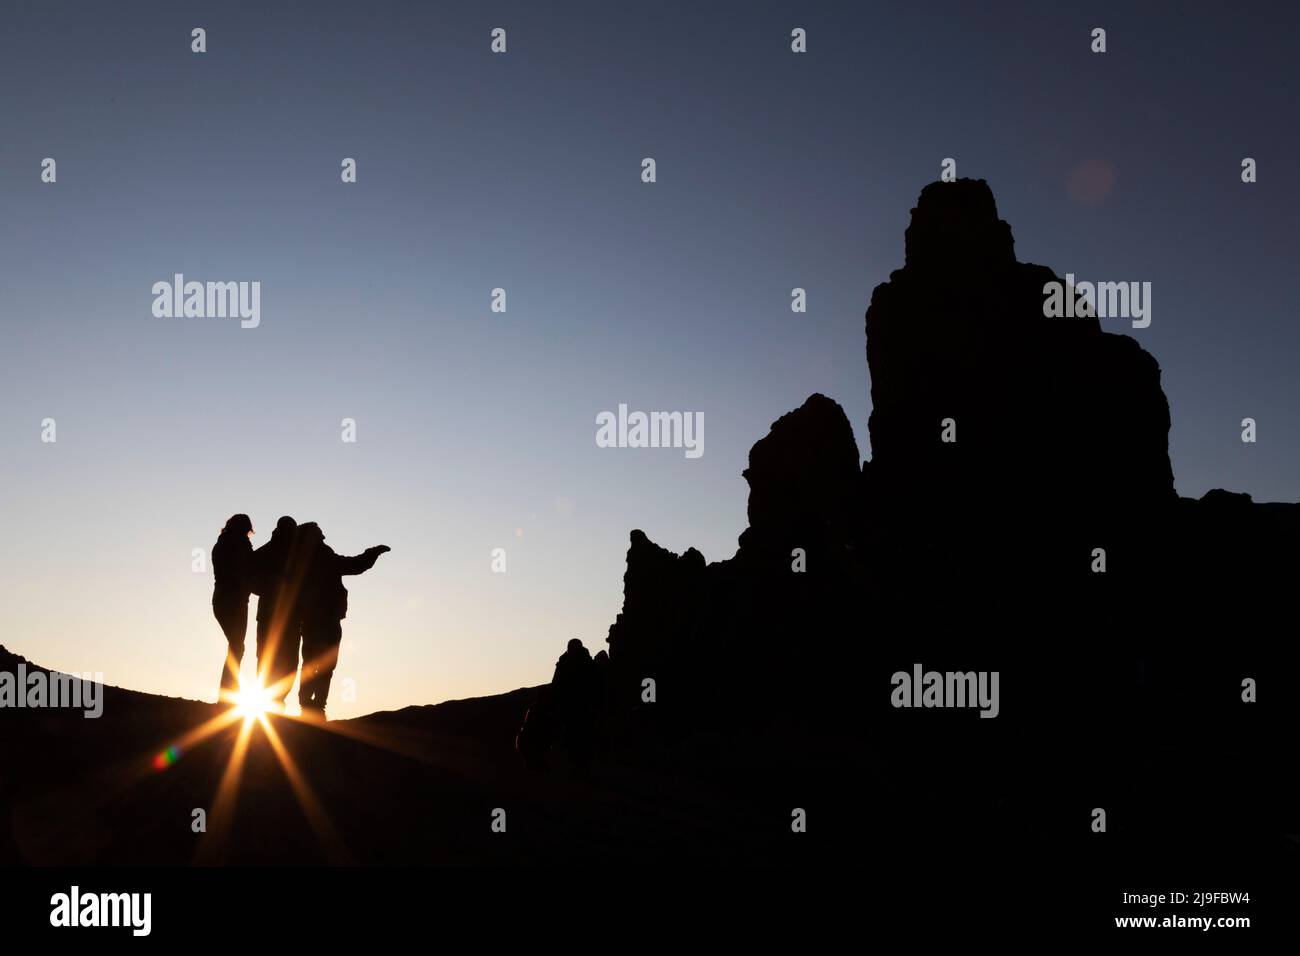 A group of people view the Las Rochas rock formation in Teide National Park in Tenerife, Spain. Stock Photo